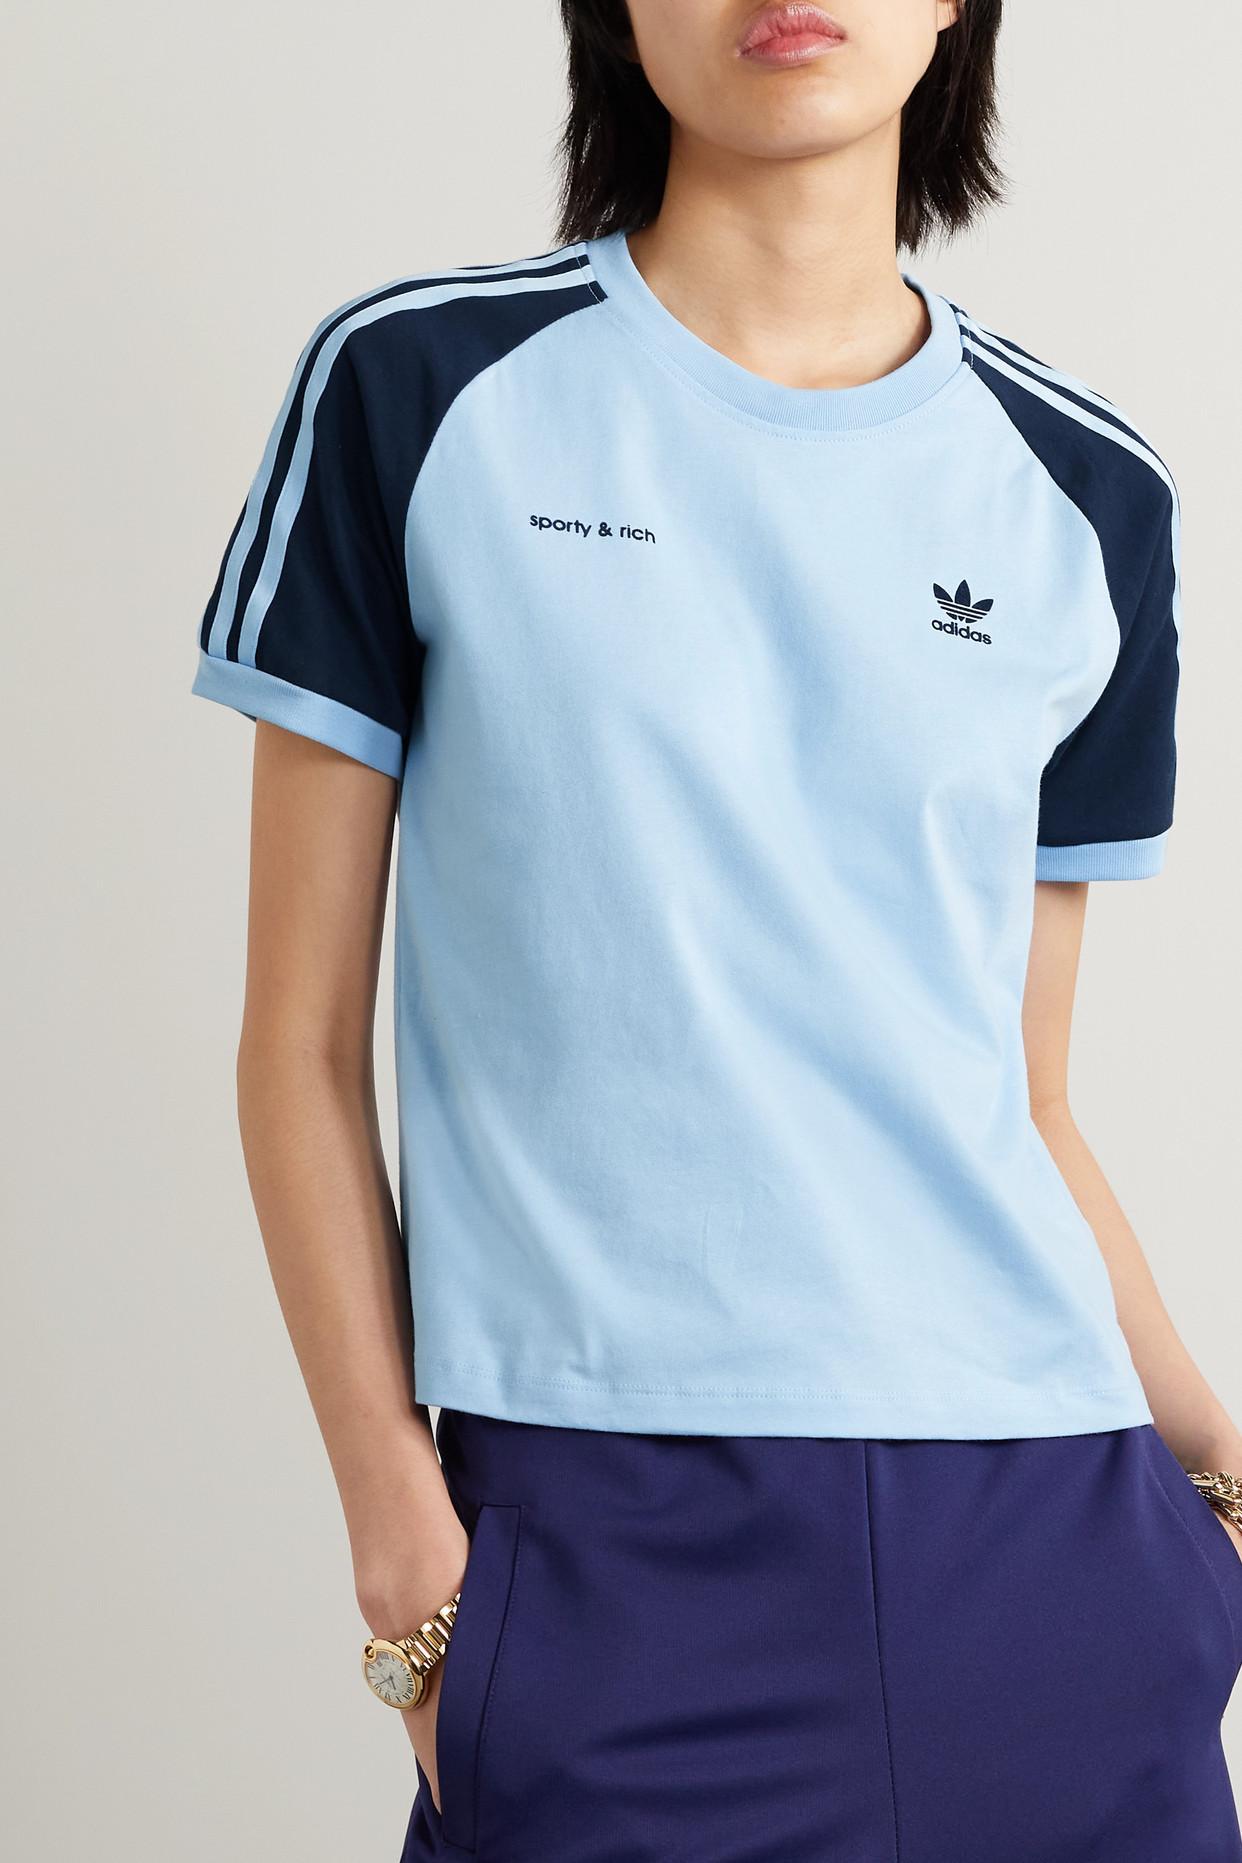 adidas Originals + Sporty & Rich Two-tone Cotton-jersey T-shirt in Blue |  Lyst